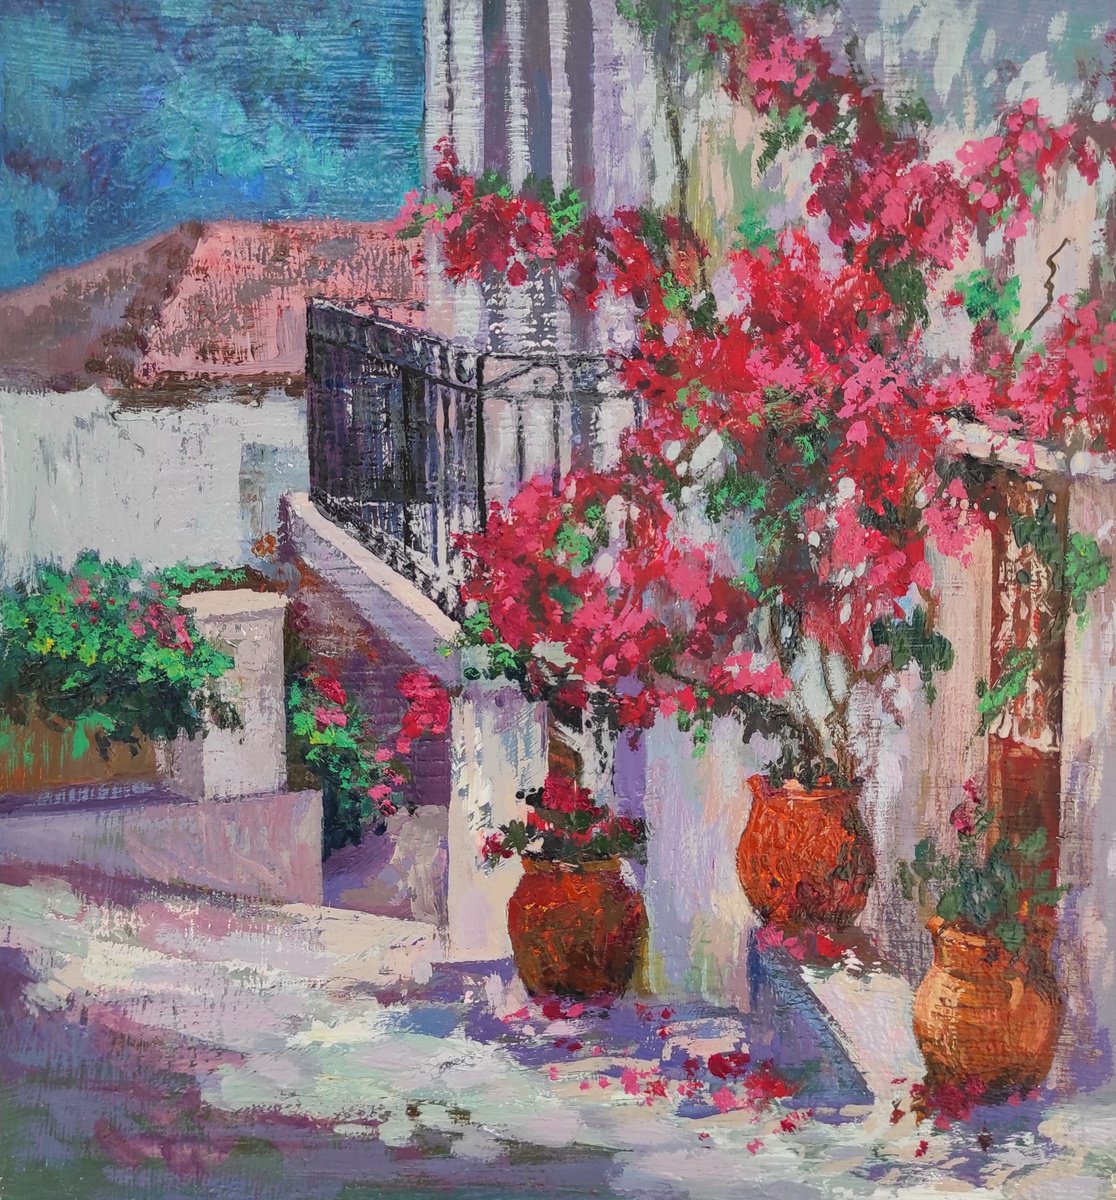 Courtyard in Greece - oil painting, landscape by Tetiana Borys